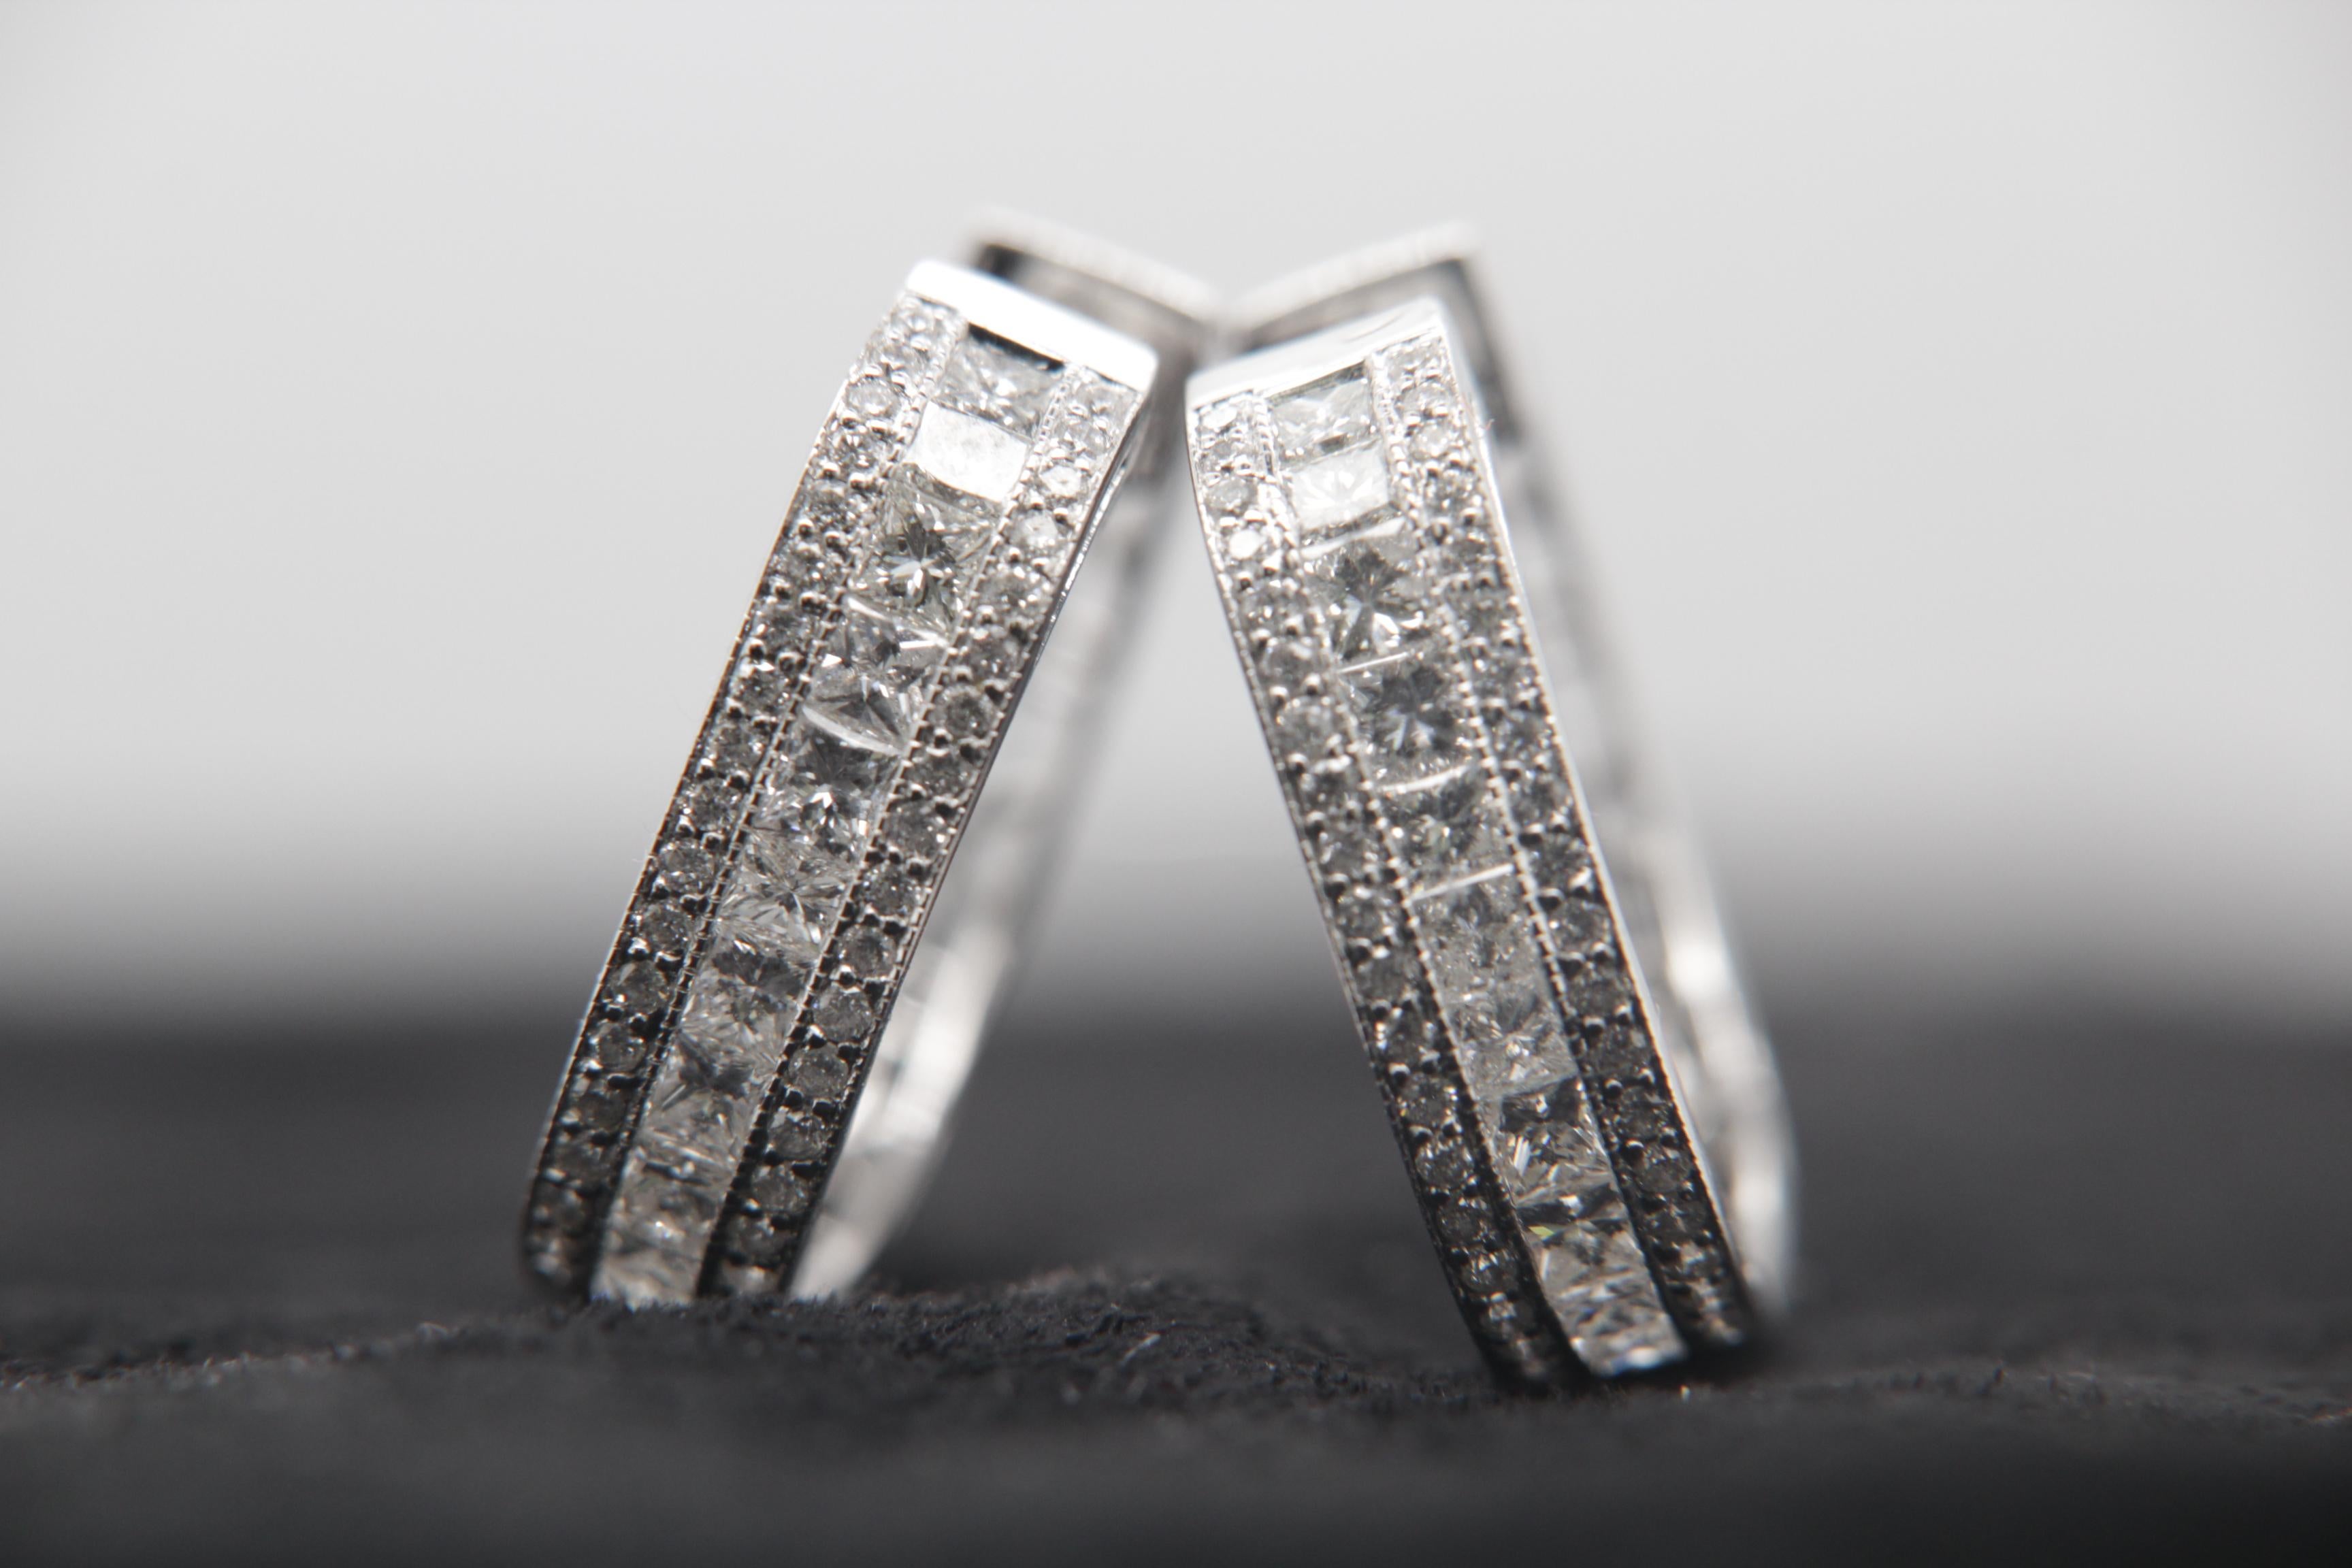 A brand new diamond earring in 18 karat gold. The total diamond weight is 1.72 carat and total earrings weight is 6.95 grams.